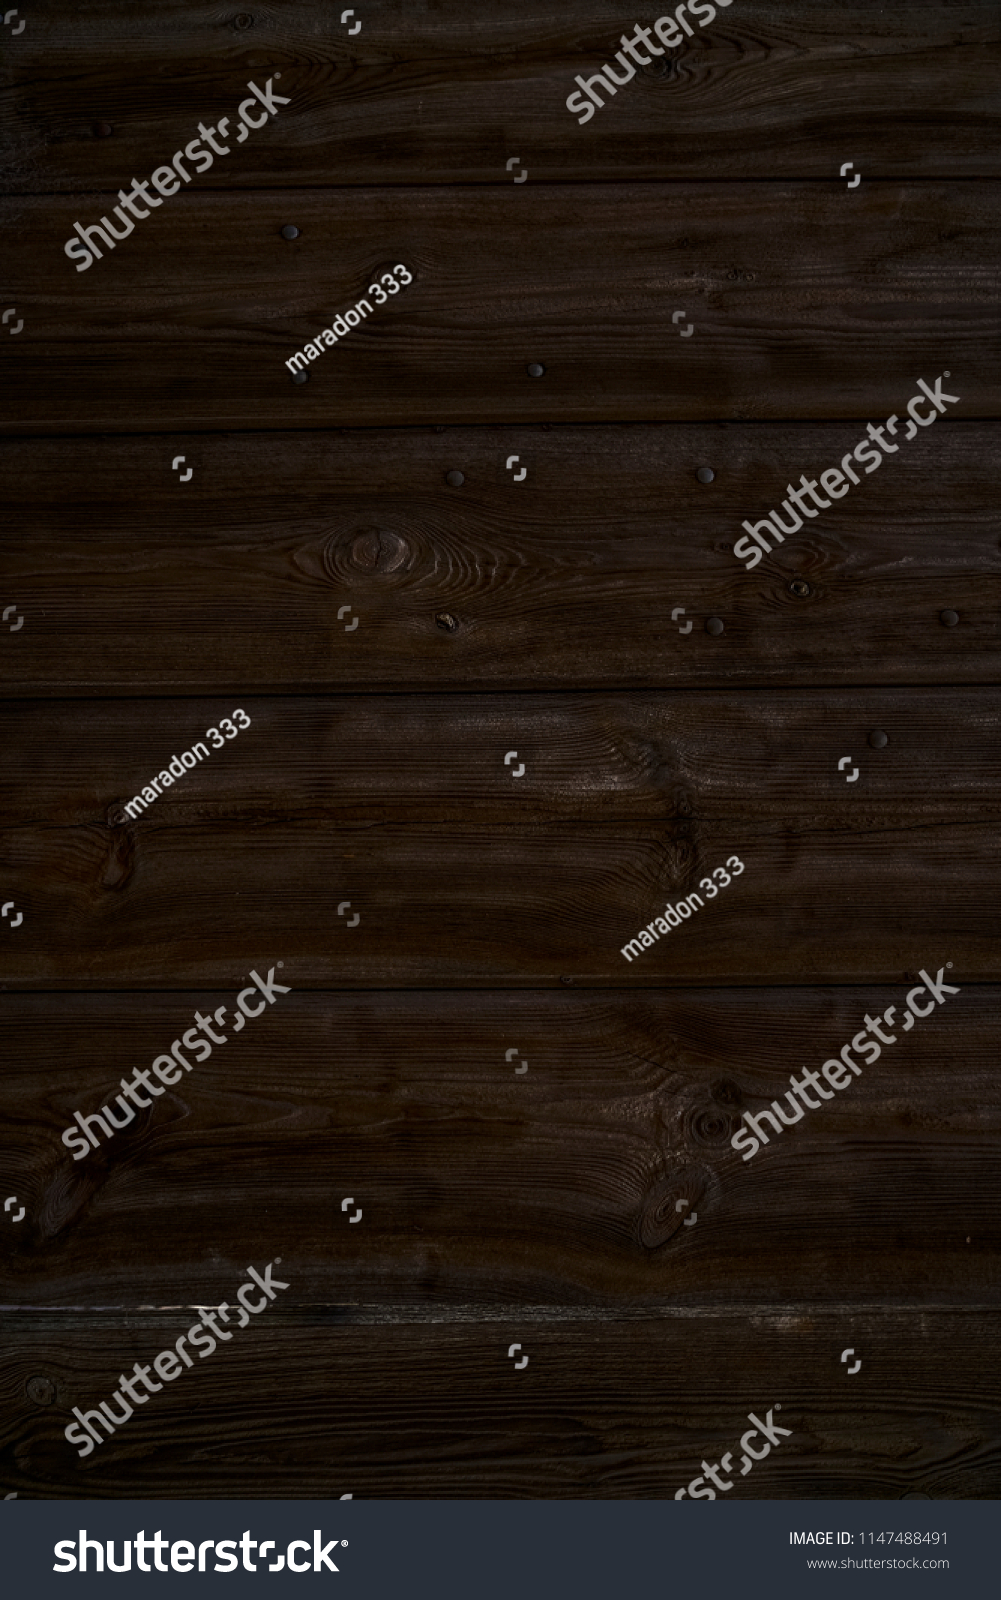 Old dark cherry wood background. Red wooden board plank texture. Beautiful natural rustic photo backdrop for vintage hipster design #1147488491